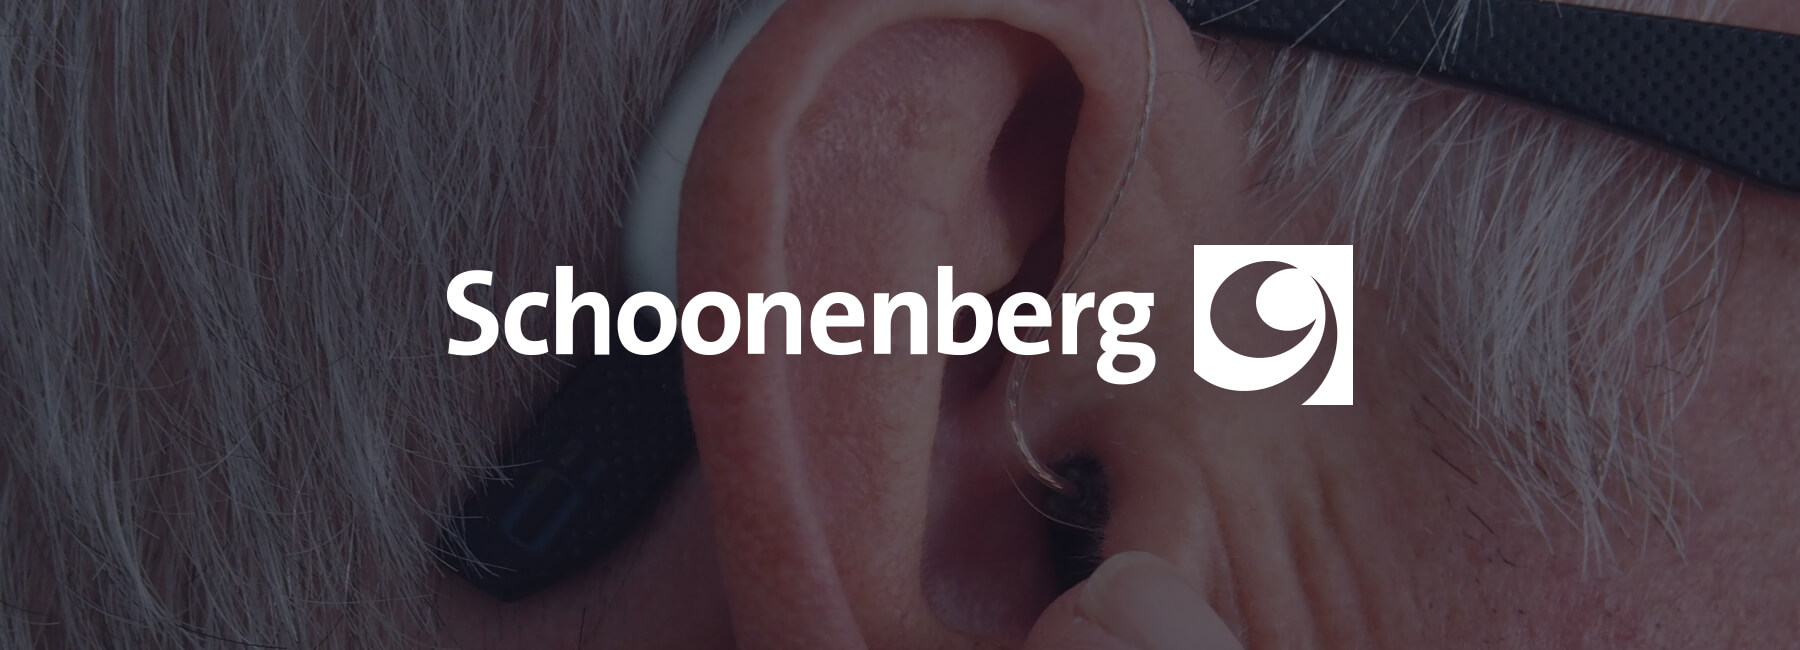 How Schoonenberg listens to the Voice of the Customer